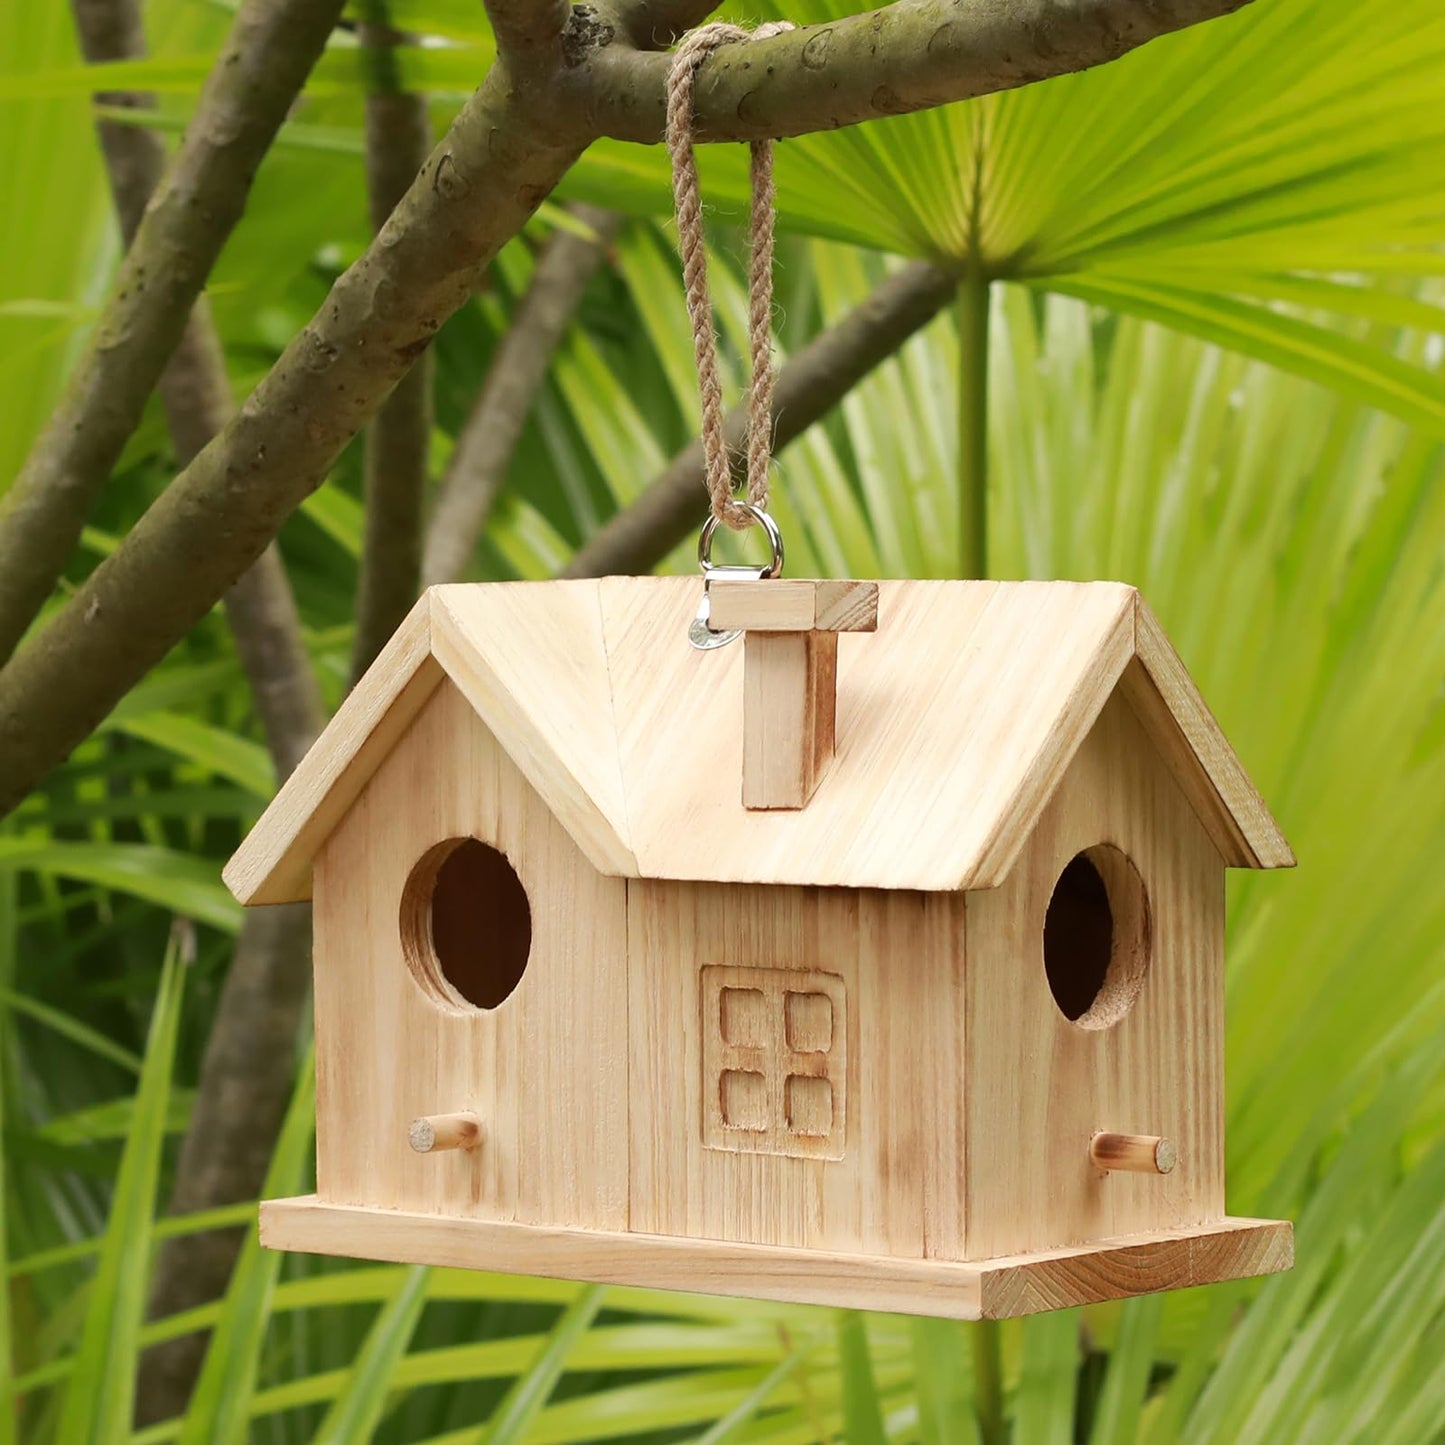 Bird House Outdoors Hanging Bird House for Outside - Unfinished Wooden Birdhouse for Painting - Sheltered Warm Place for Small Birds Bluebird House-